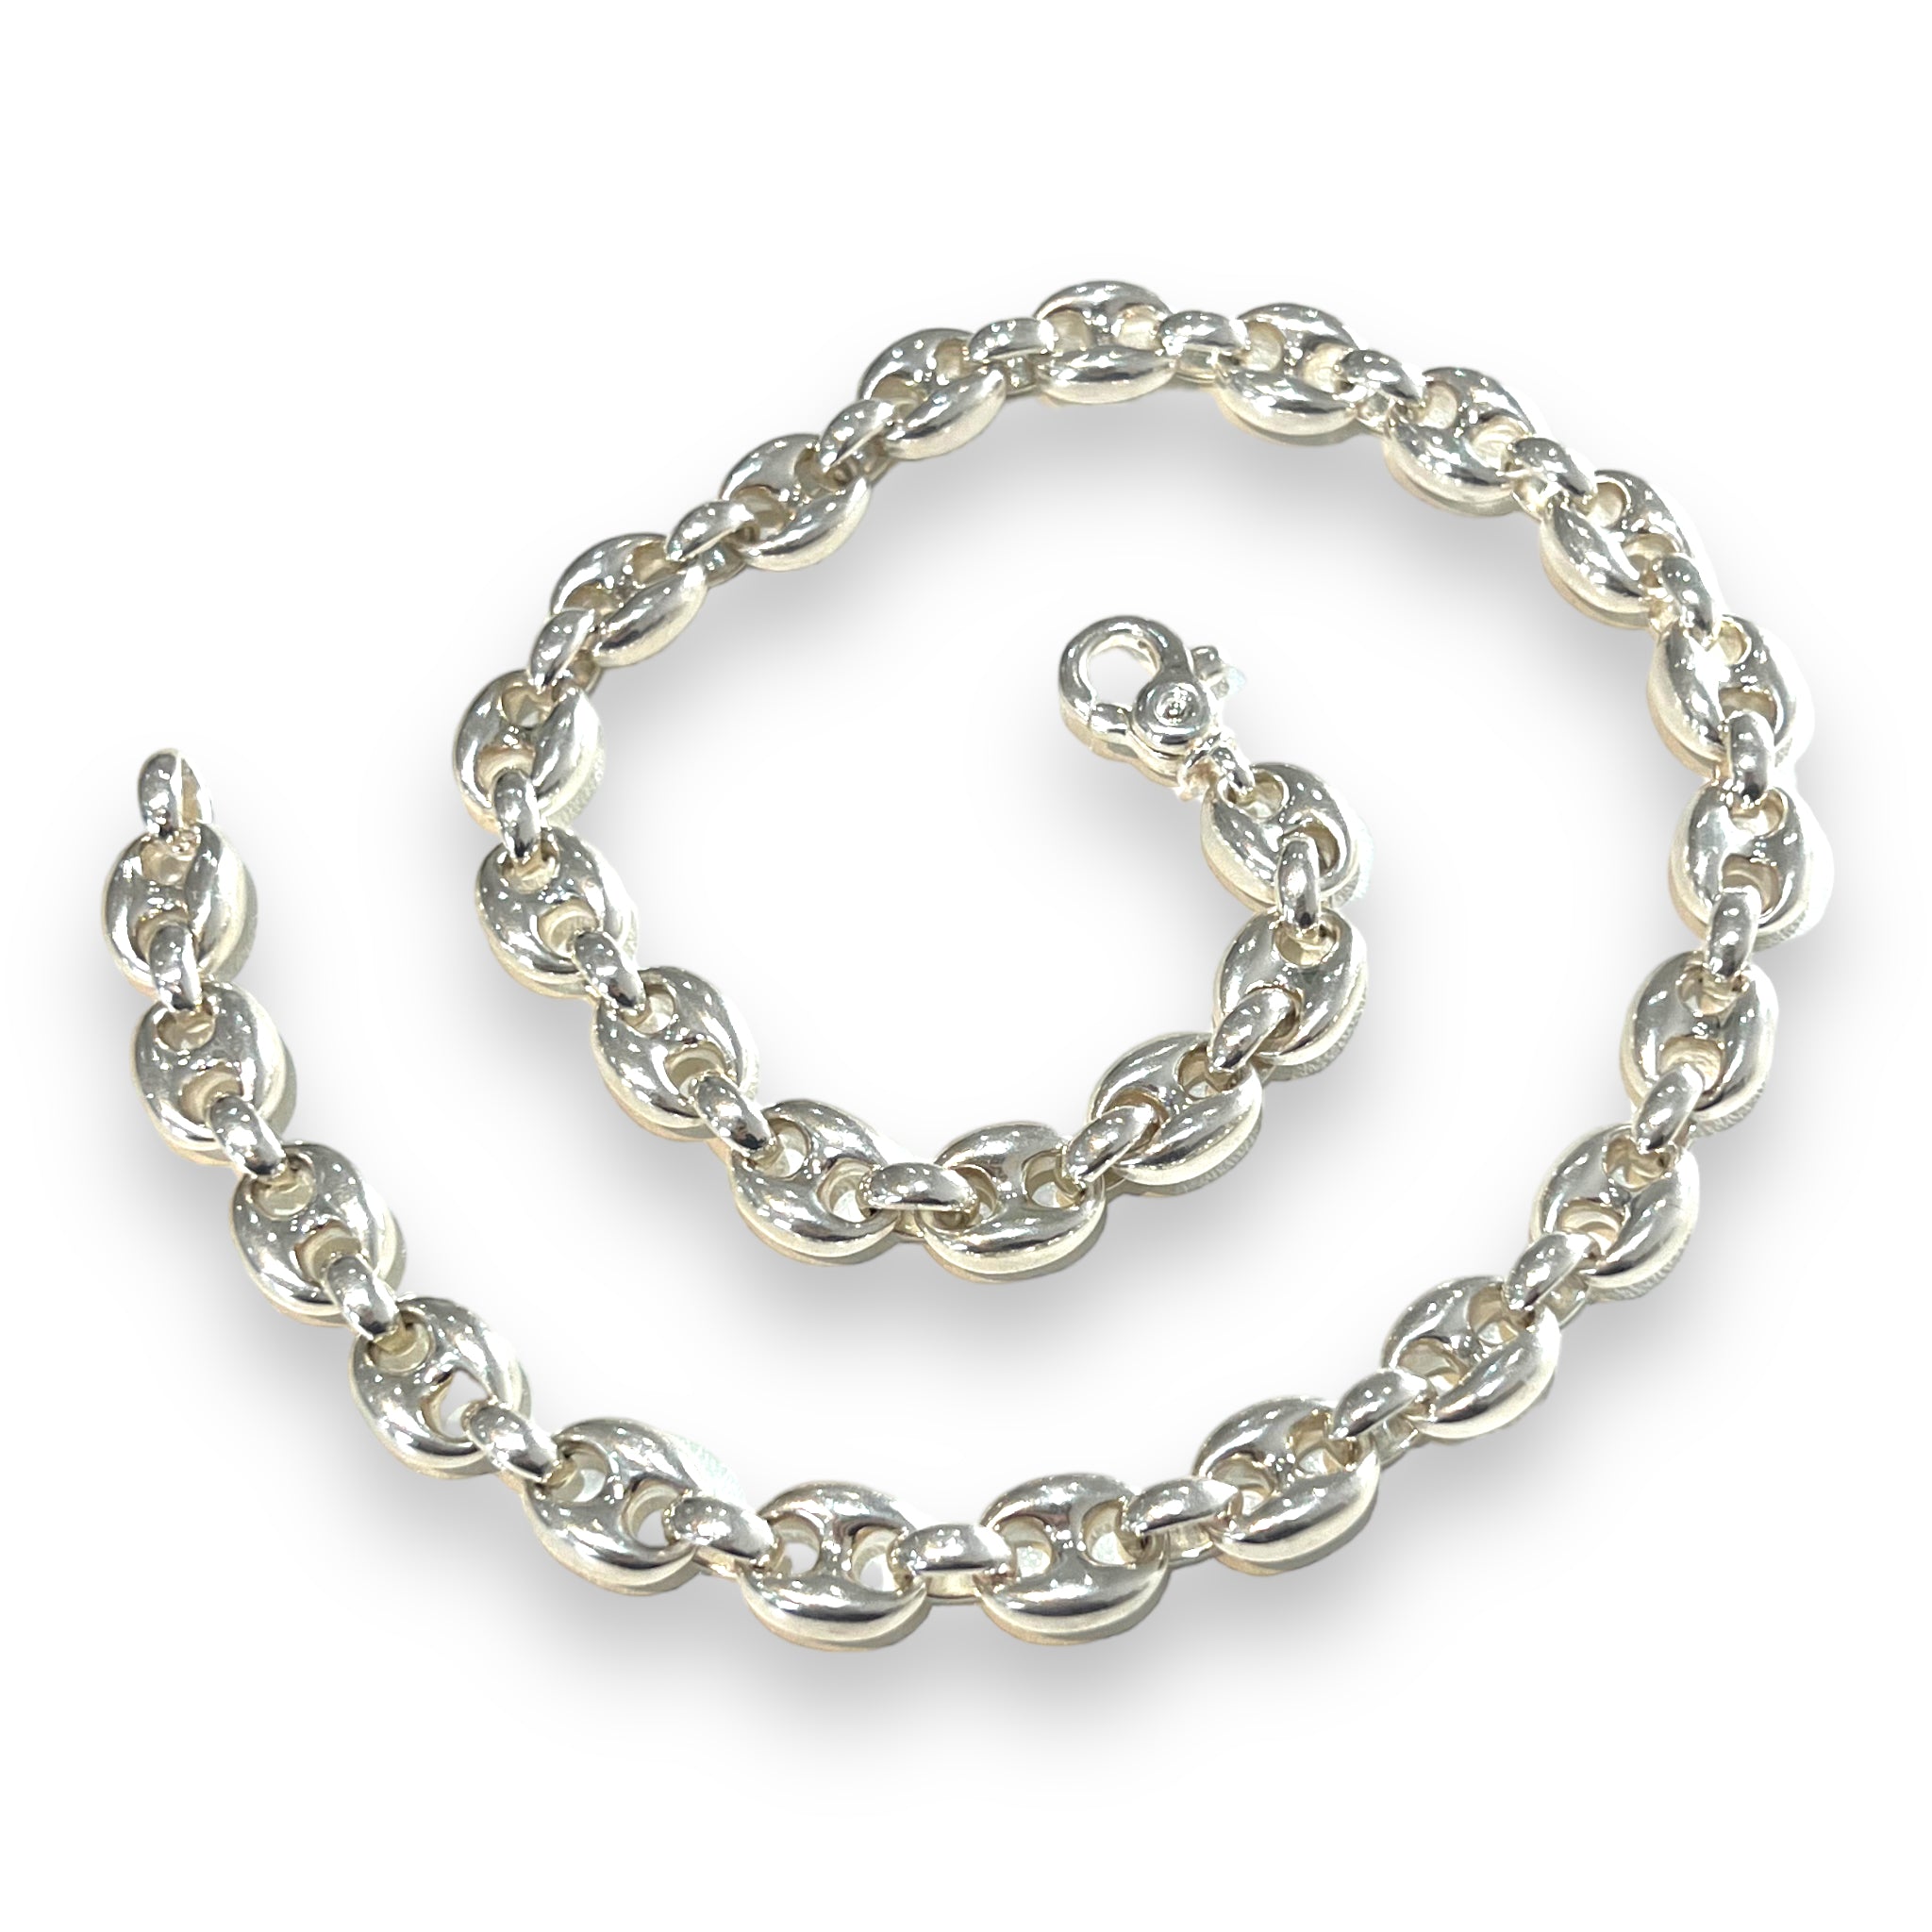 Solid Silver Ship Link Necklace - Wildsmith Jewellery